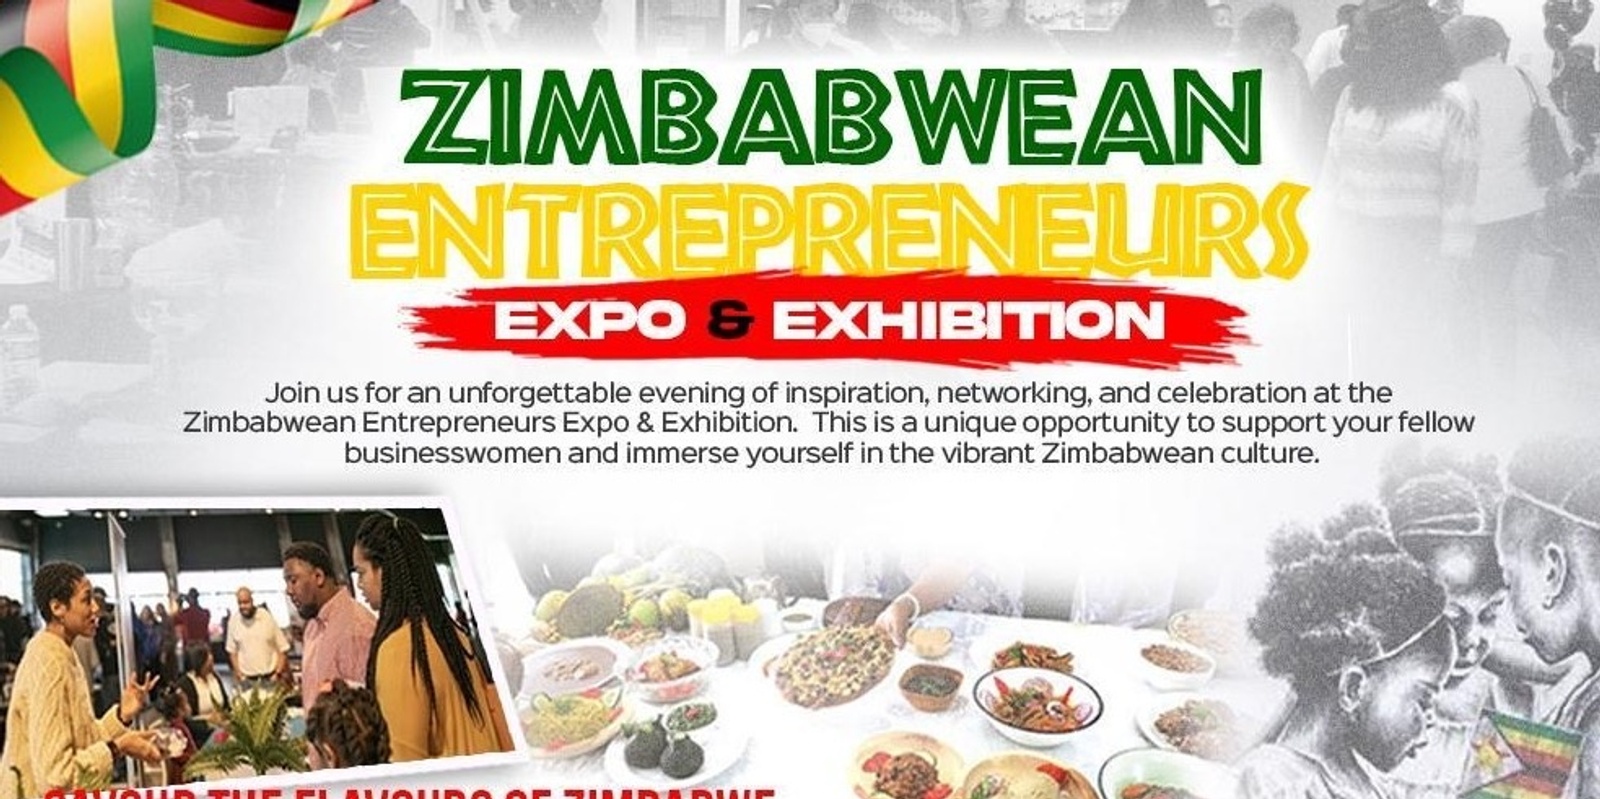 Banner image for Zimbabwean entrepreneurs expo and exhibition 